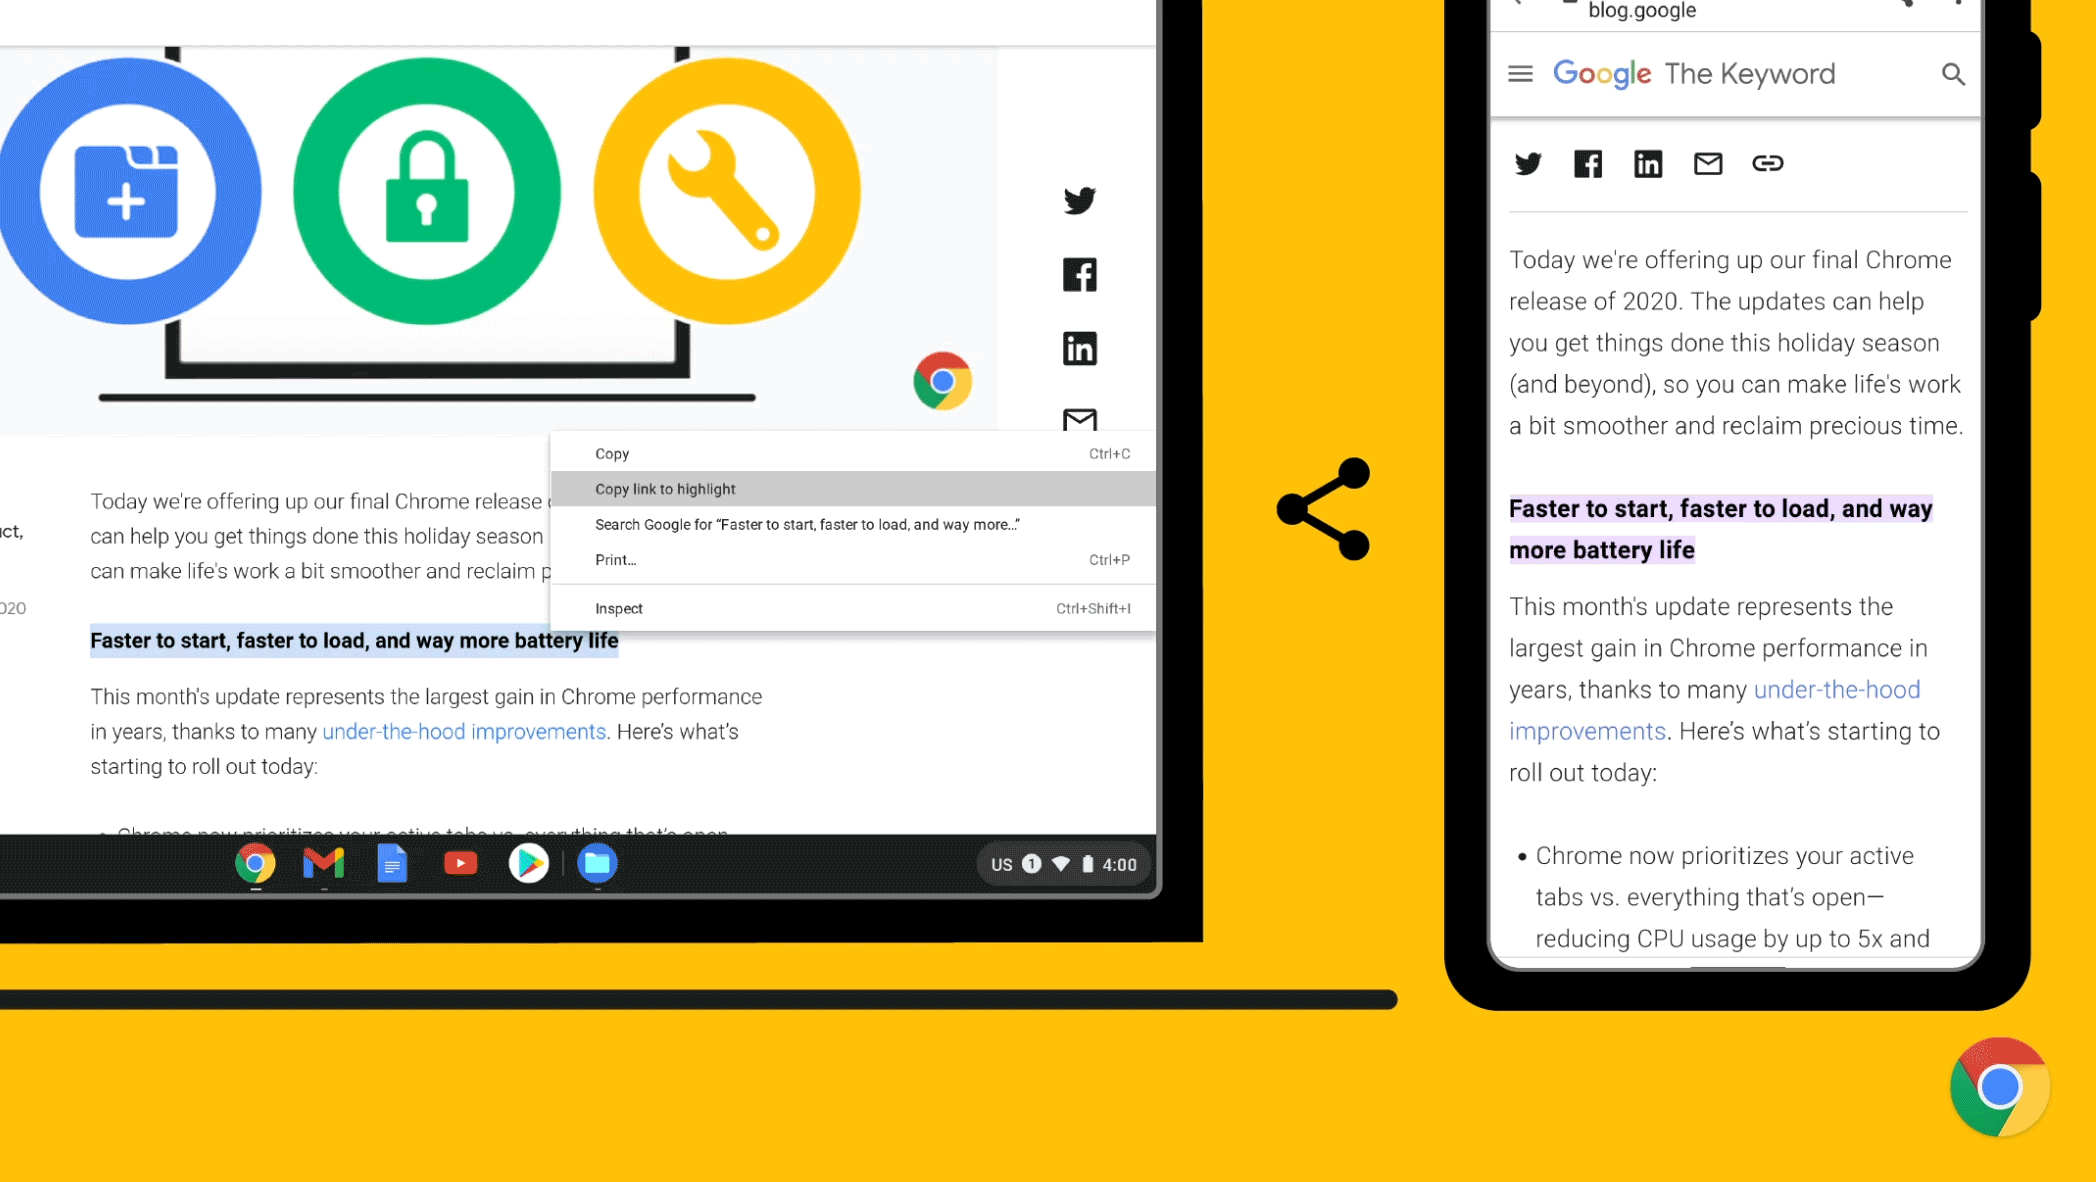 New features in Chrome 90 in a GIF